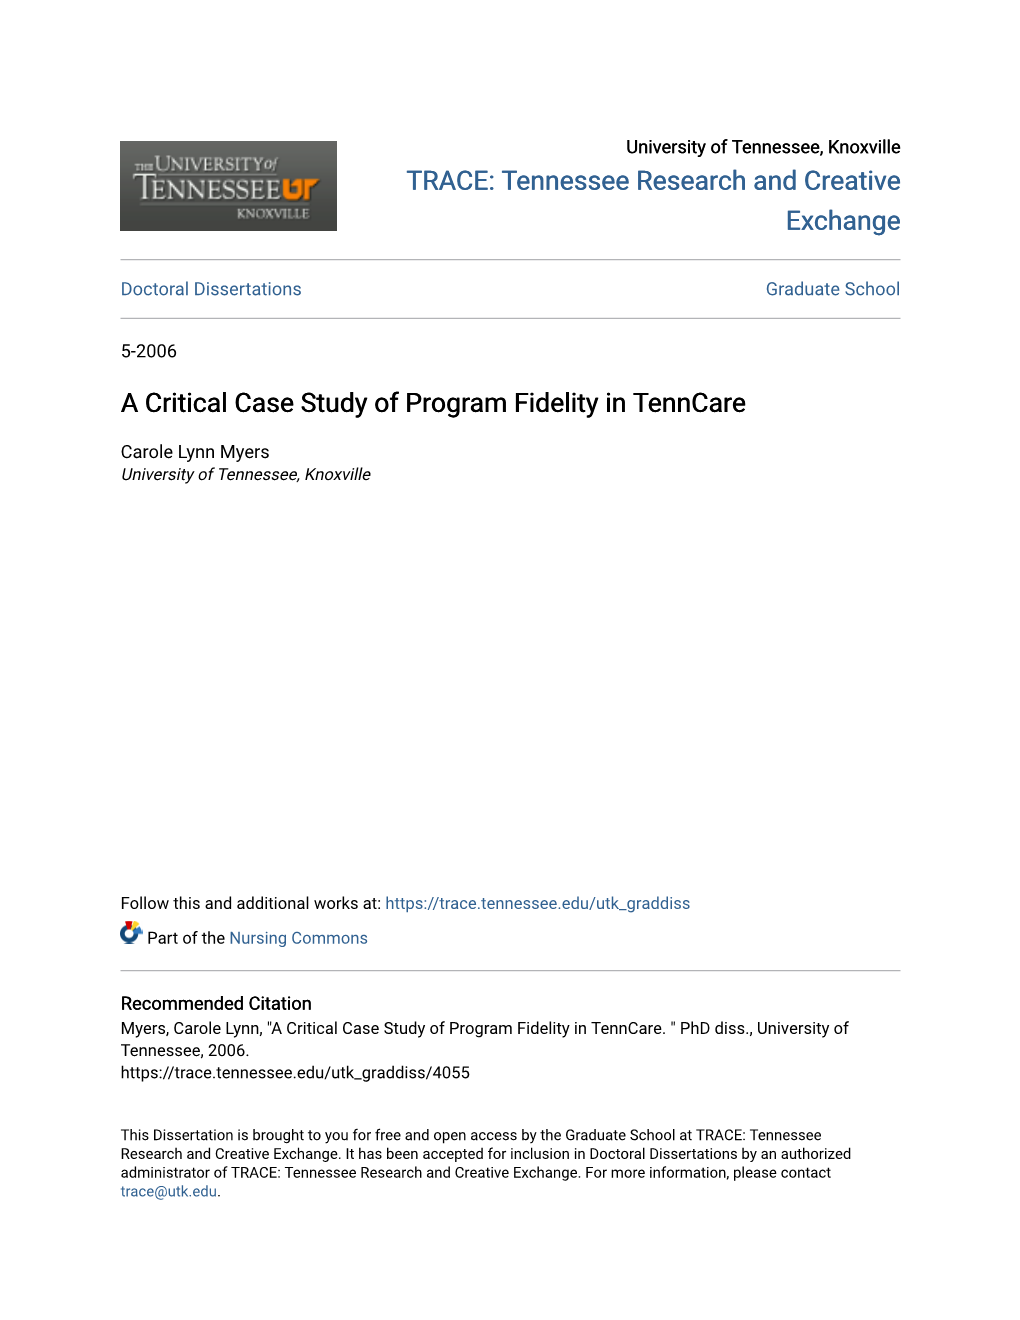 A Critical Case Study of Program Fidelity in Tenncare